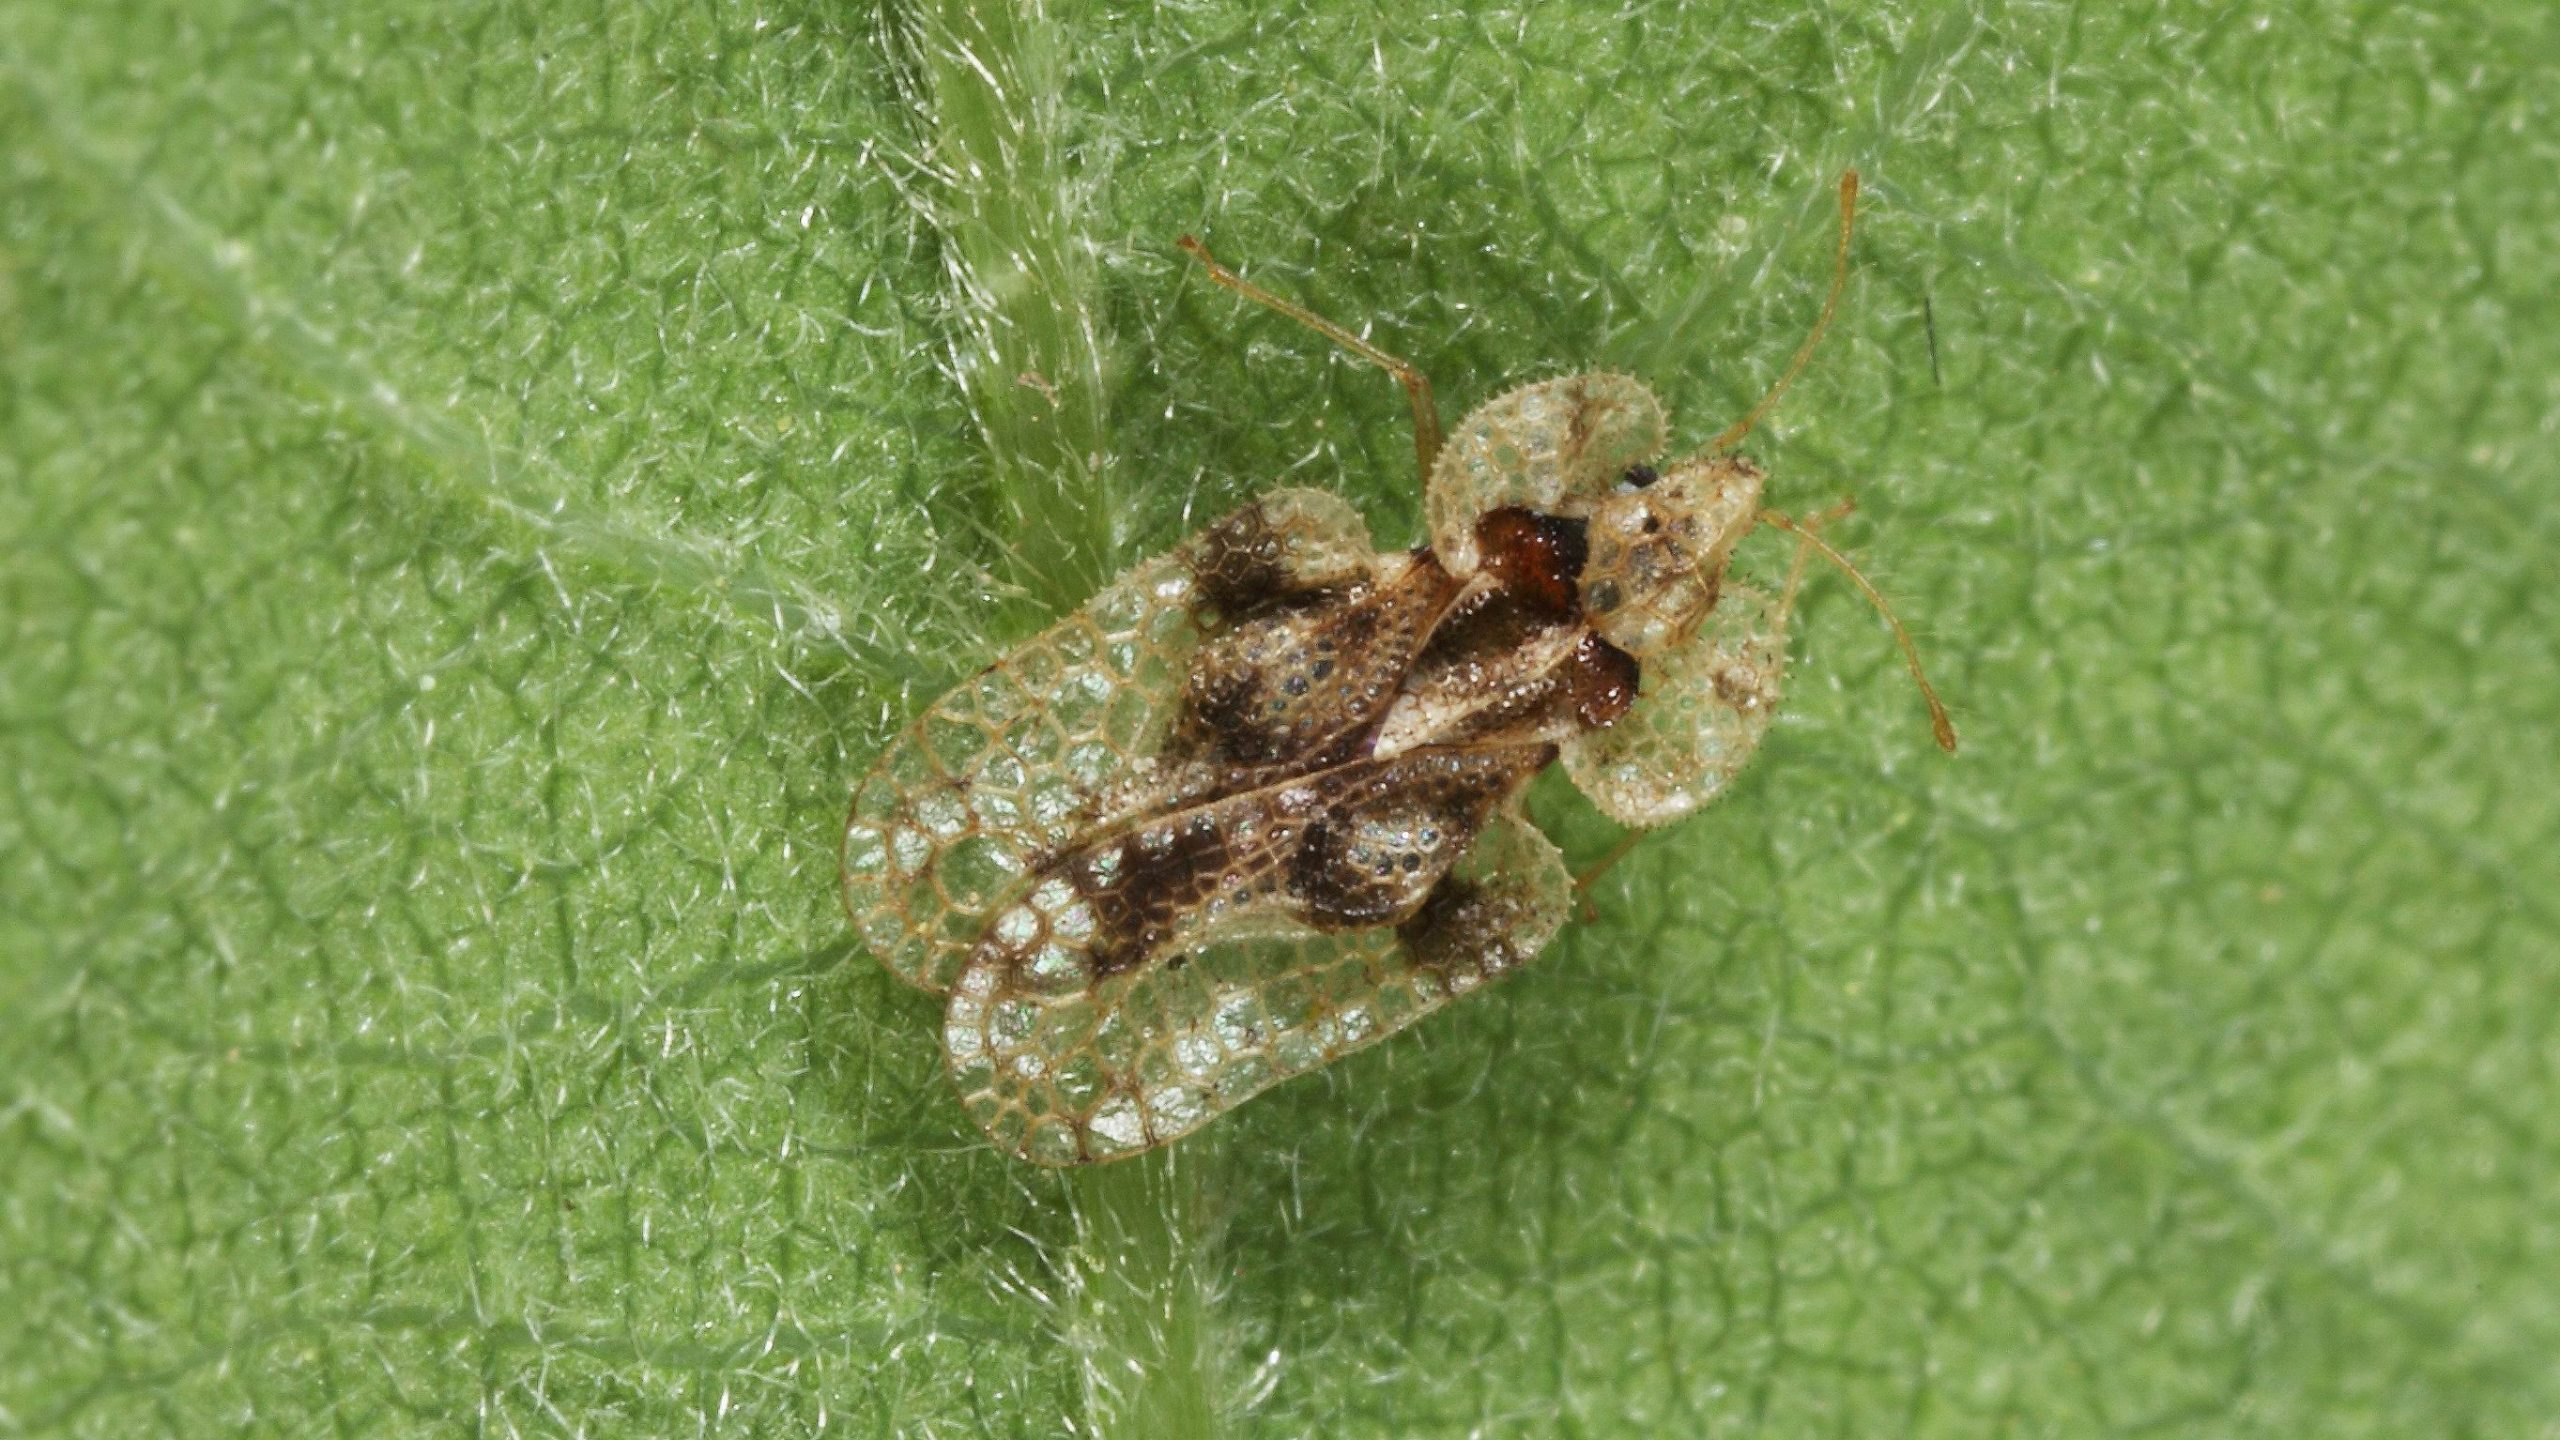 Close-up of an oak lace bug on a green leaf.